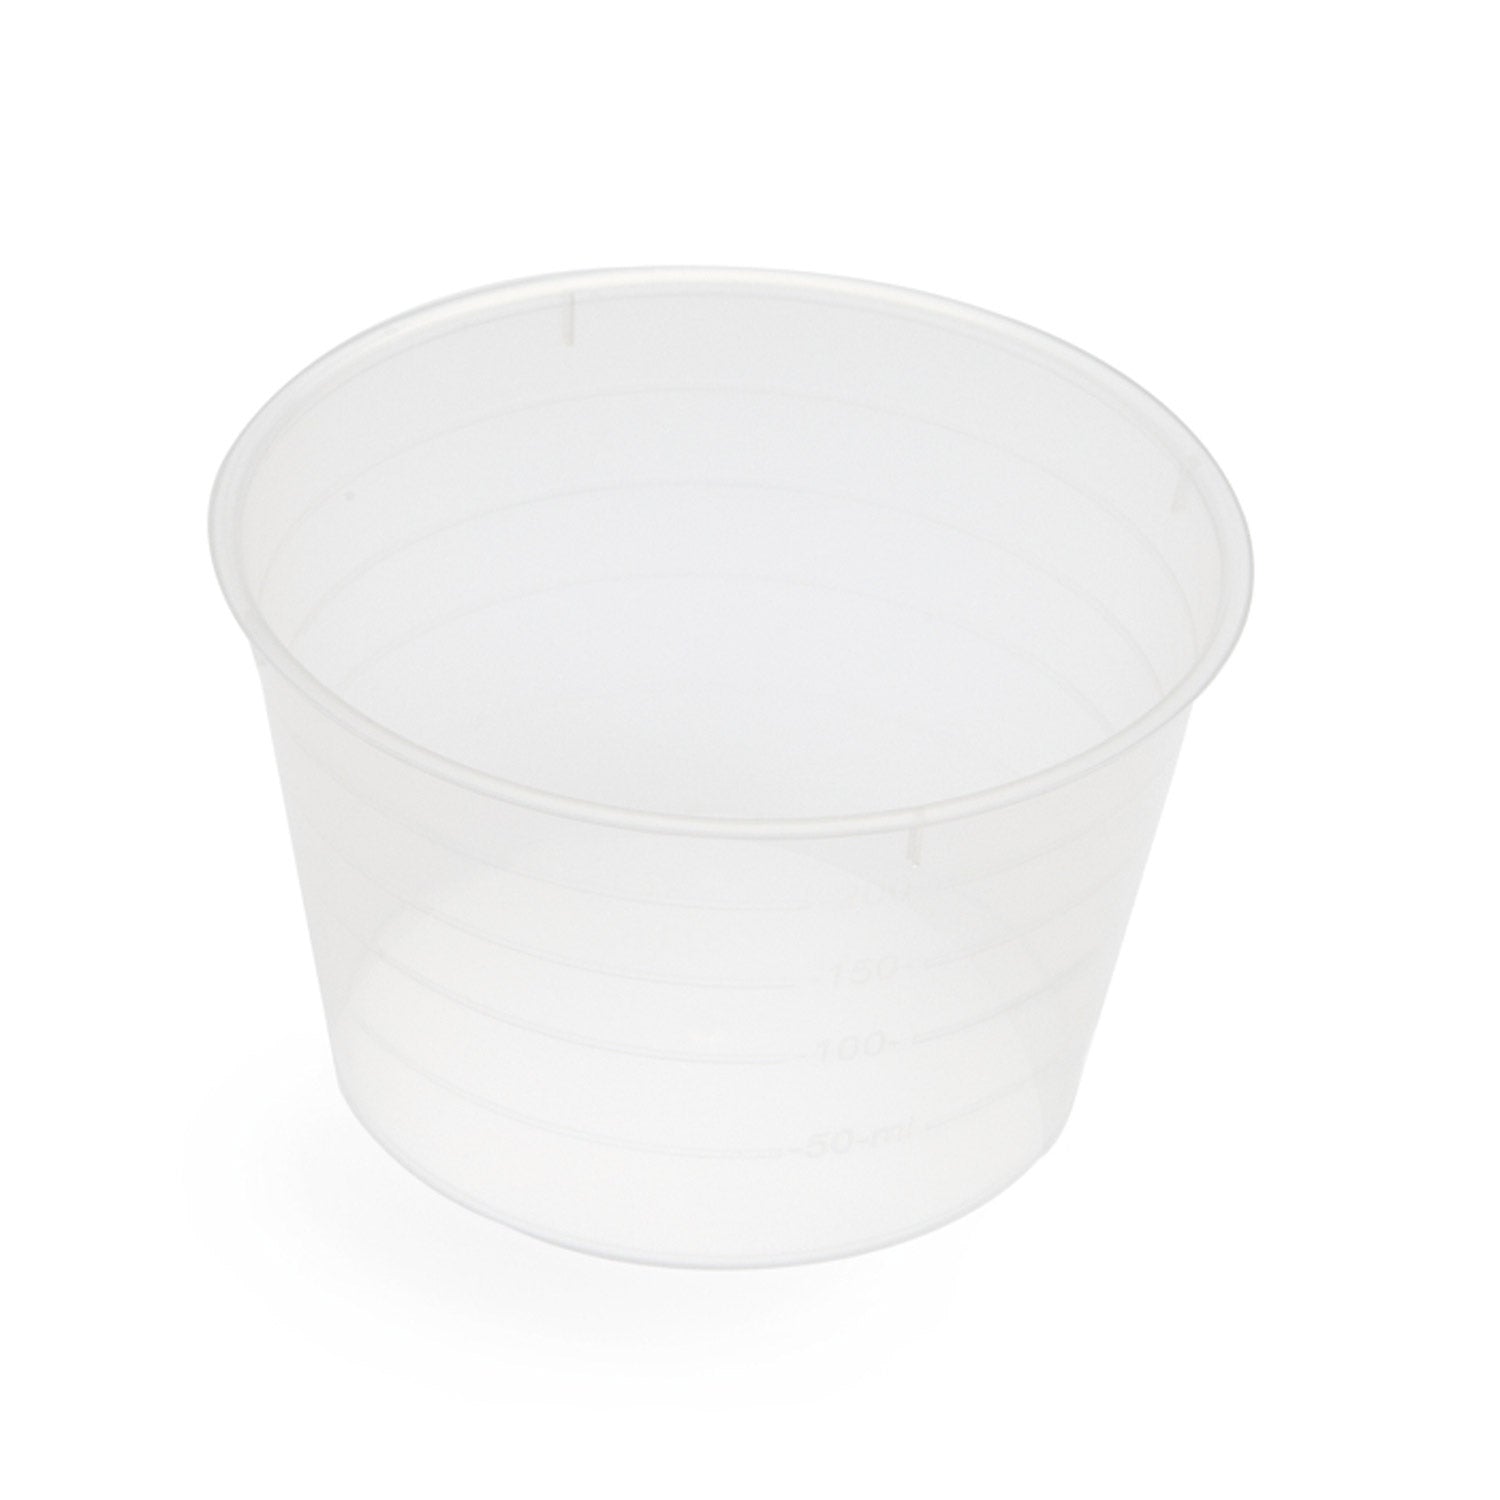 Mediset® Cup With A Capacity Of 250 Ml